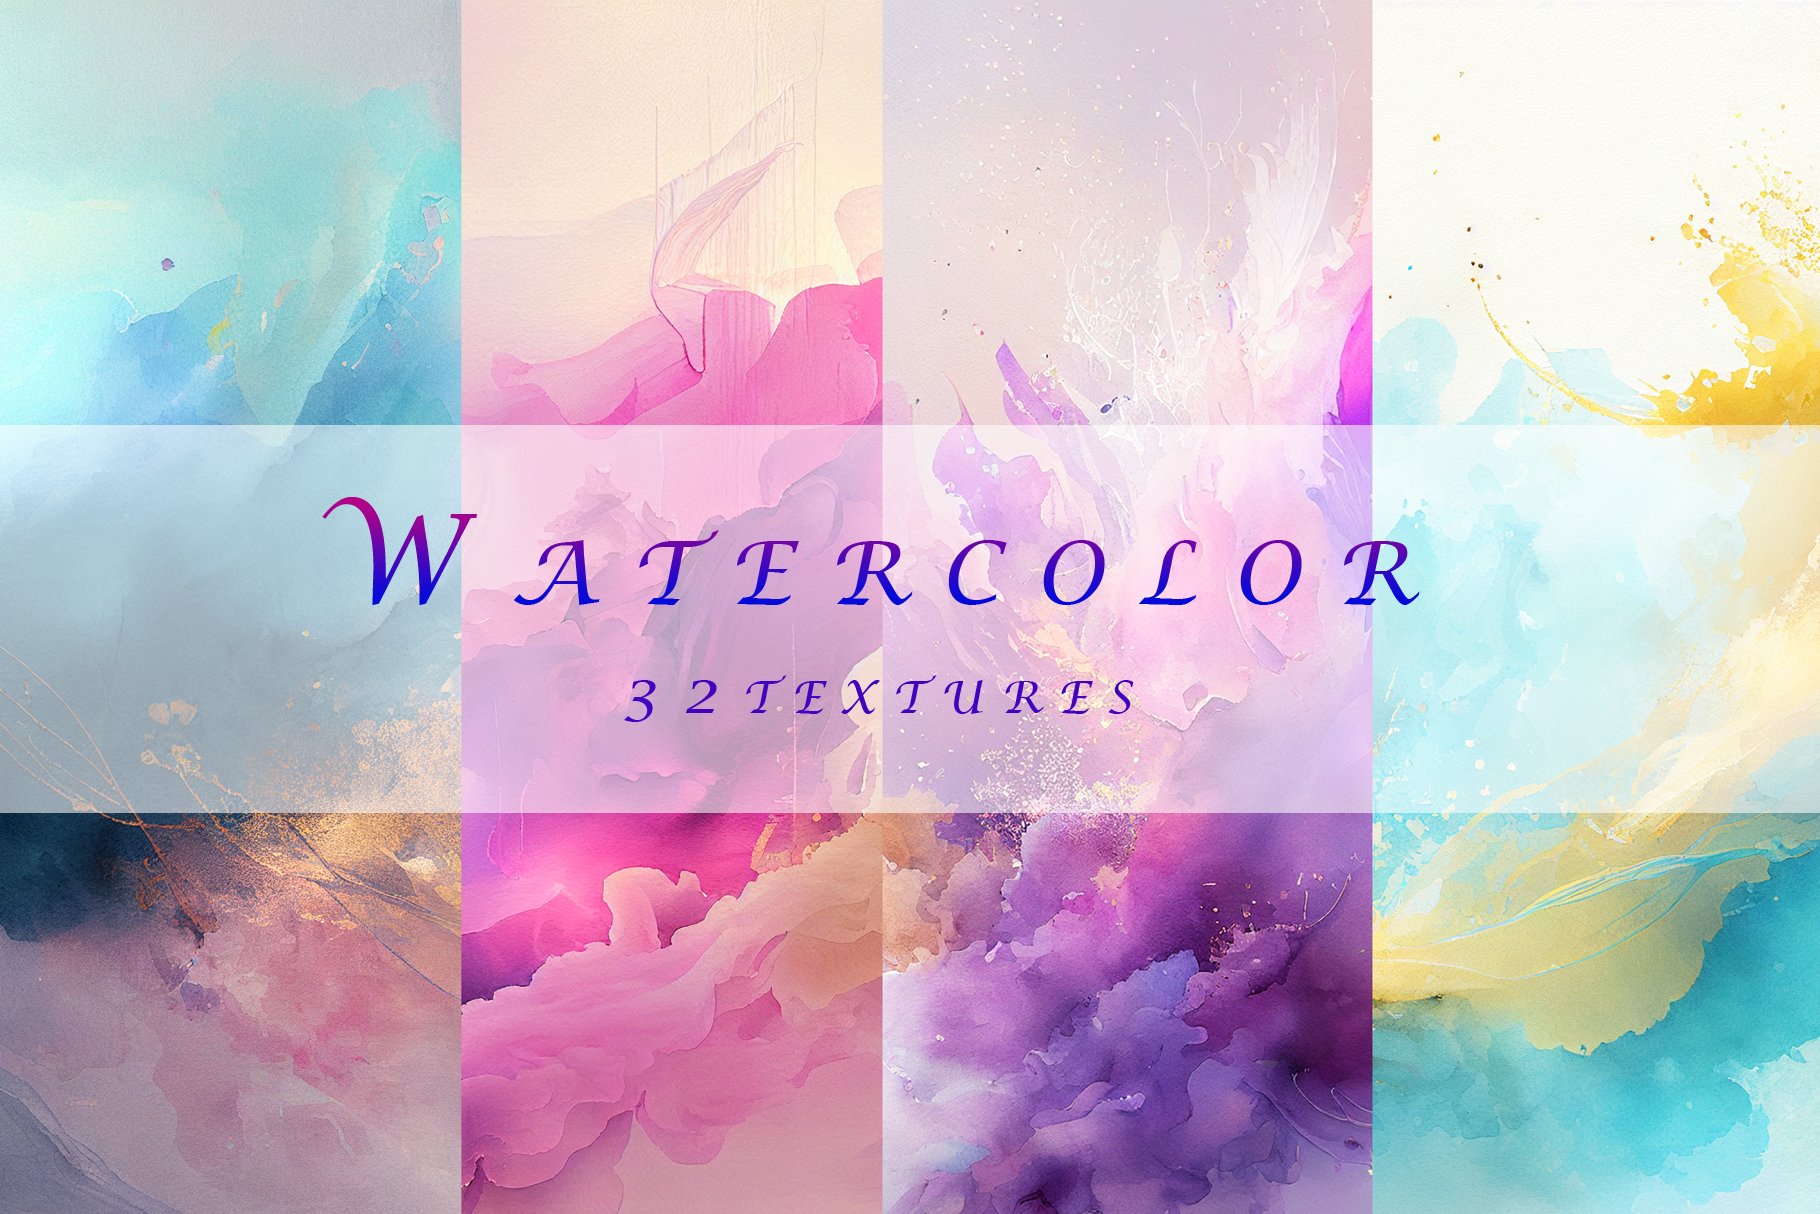 Watercolor colorful textures cover image.